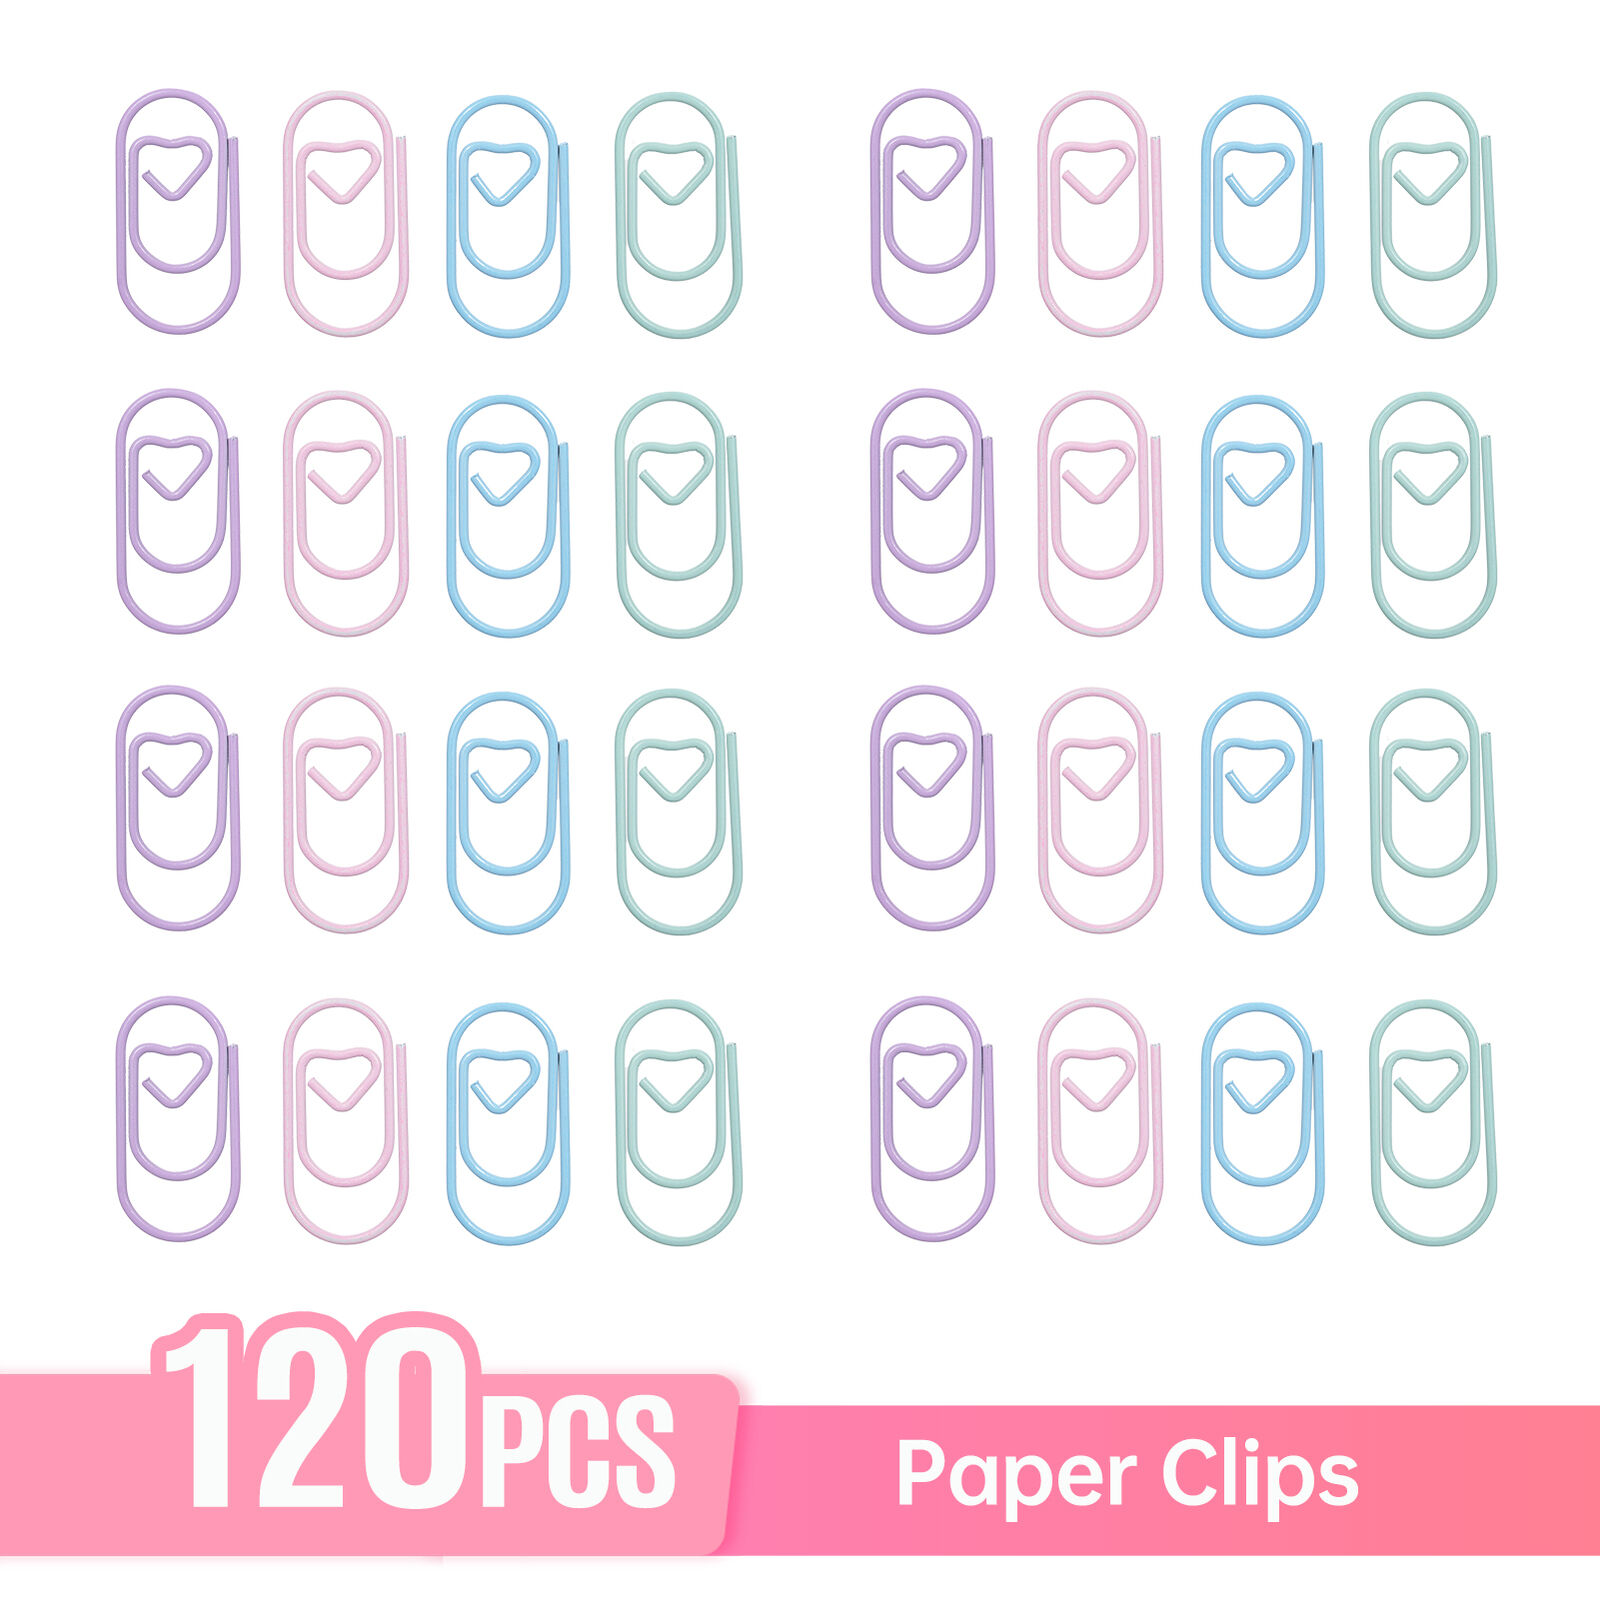 120pcs Paper Clips Heart Paper Clips Small and Cute Love Shaped Paperclips N5I2